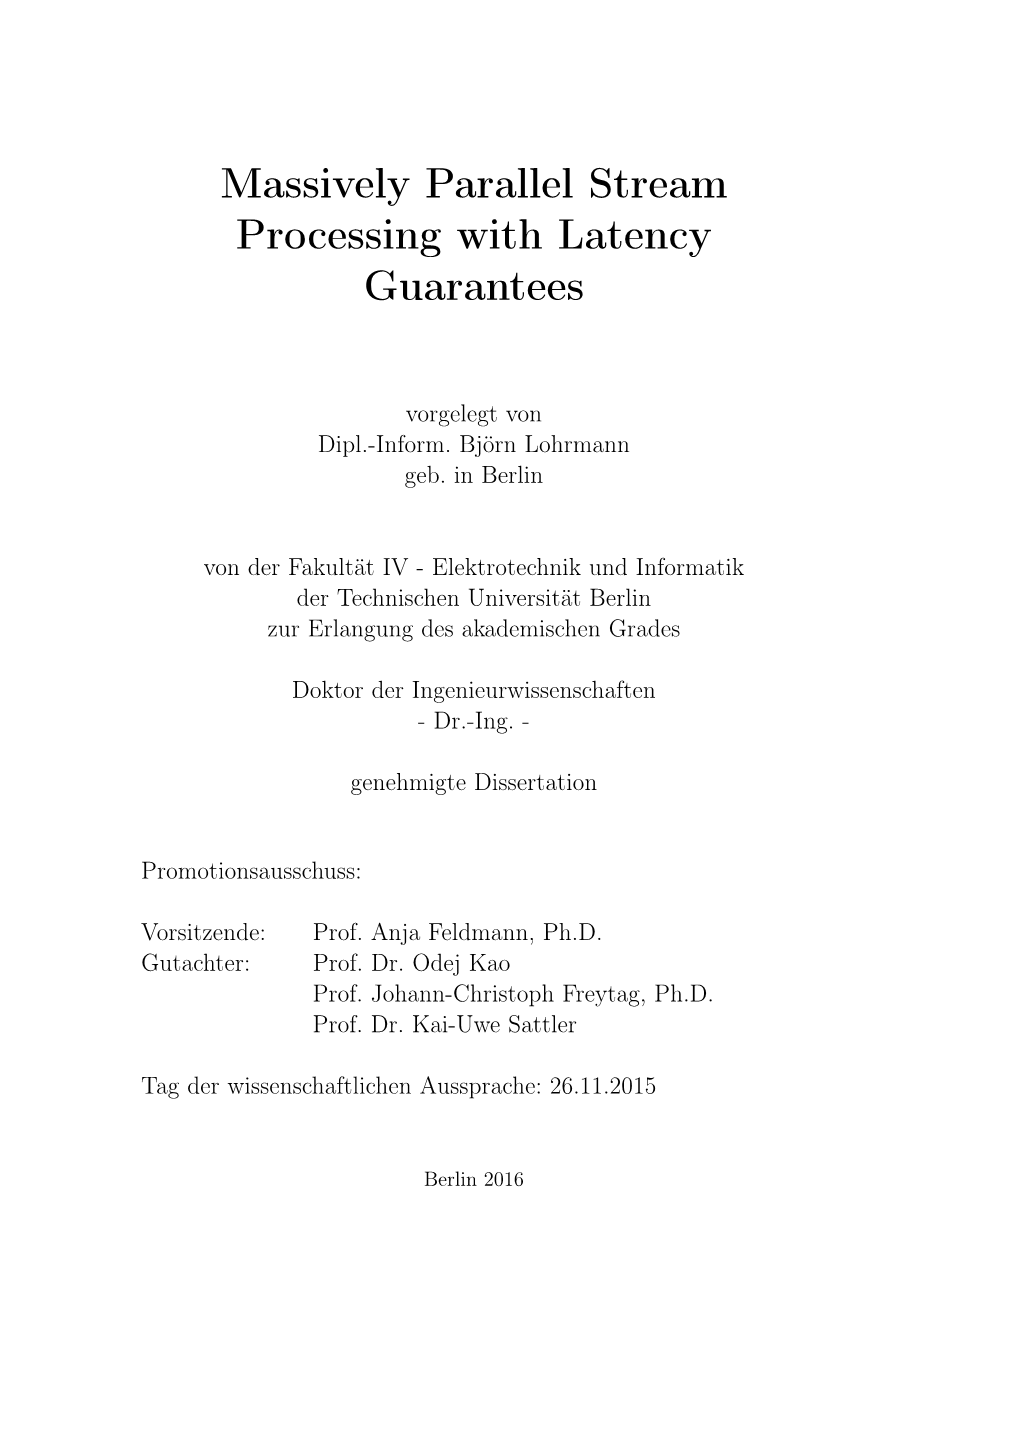 Massively Parallel Stream Processing with Latency Guarantees